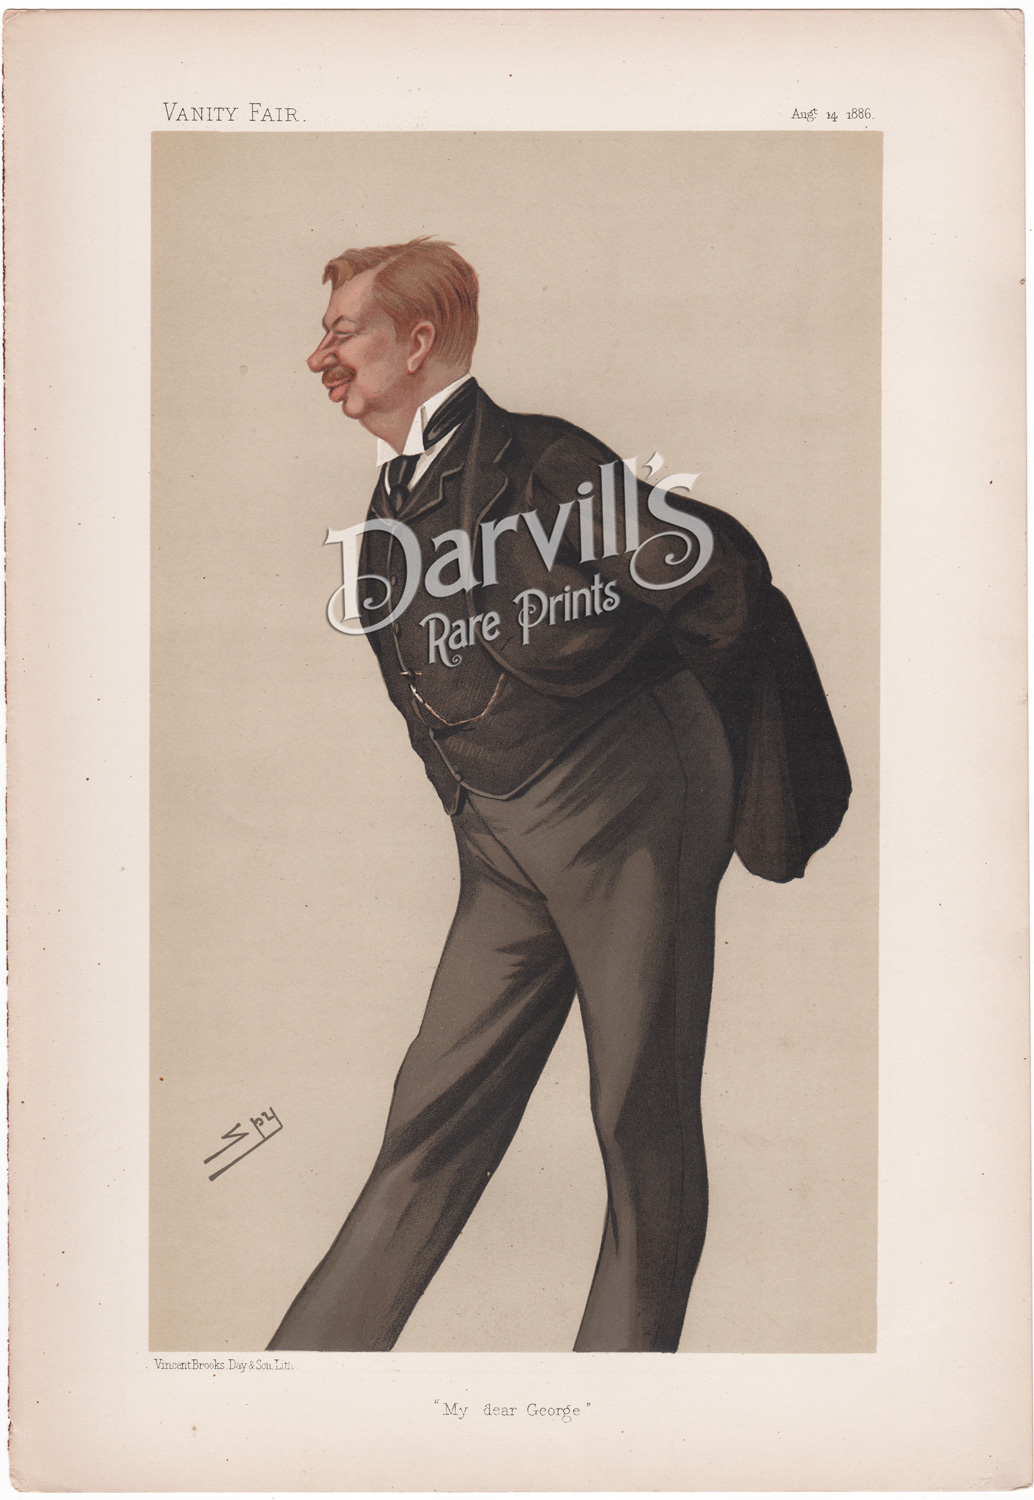 Mr George Granville Leveson-Gower Aug 14 1886